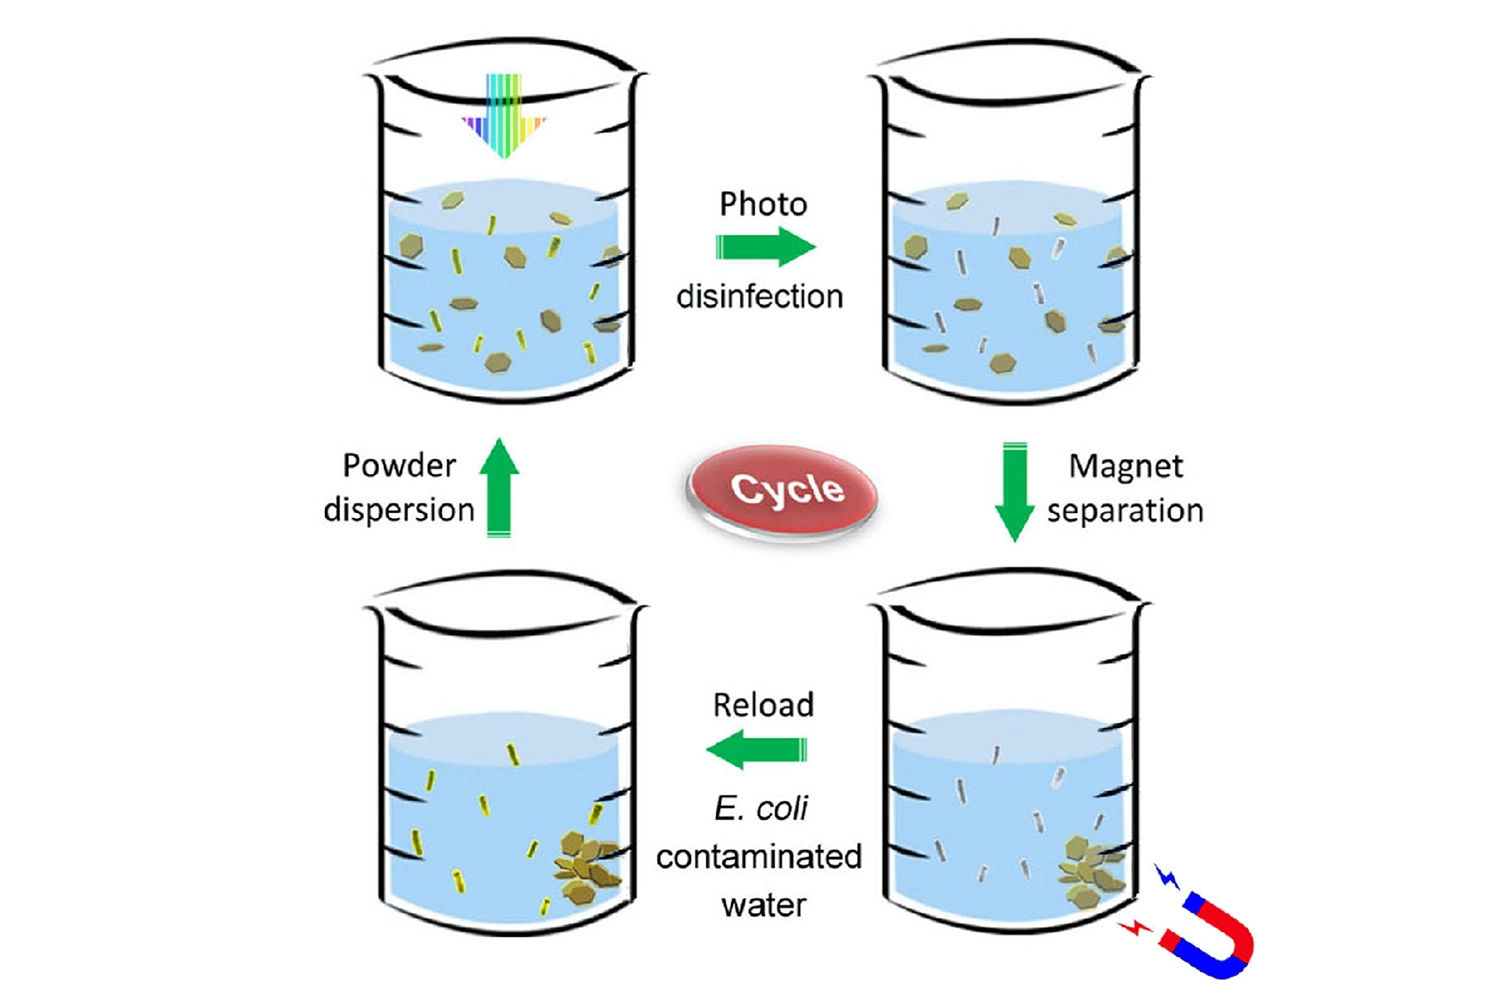 Disinfectant powder is stirred in bacteria-contaminated water (upper left). The mixture is exposed to sunlight, which rapidly kills all the bacteria (upper right). A magnet collects the metallic powder after disinfection (lower right). The powder is then reloaded into another beaker of contaminated water, and the disinfection process is repeated (lower left). (Image credit: Tong Wu/Stanford University)